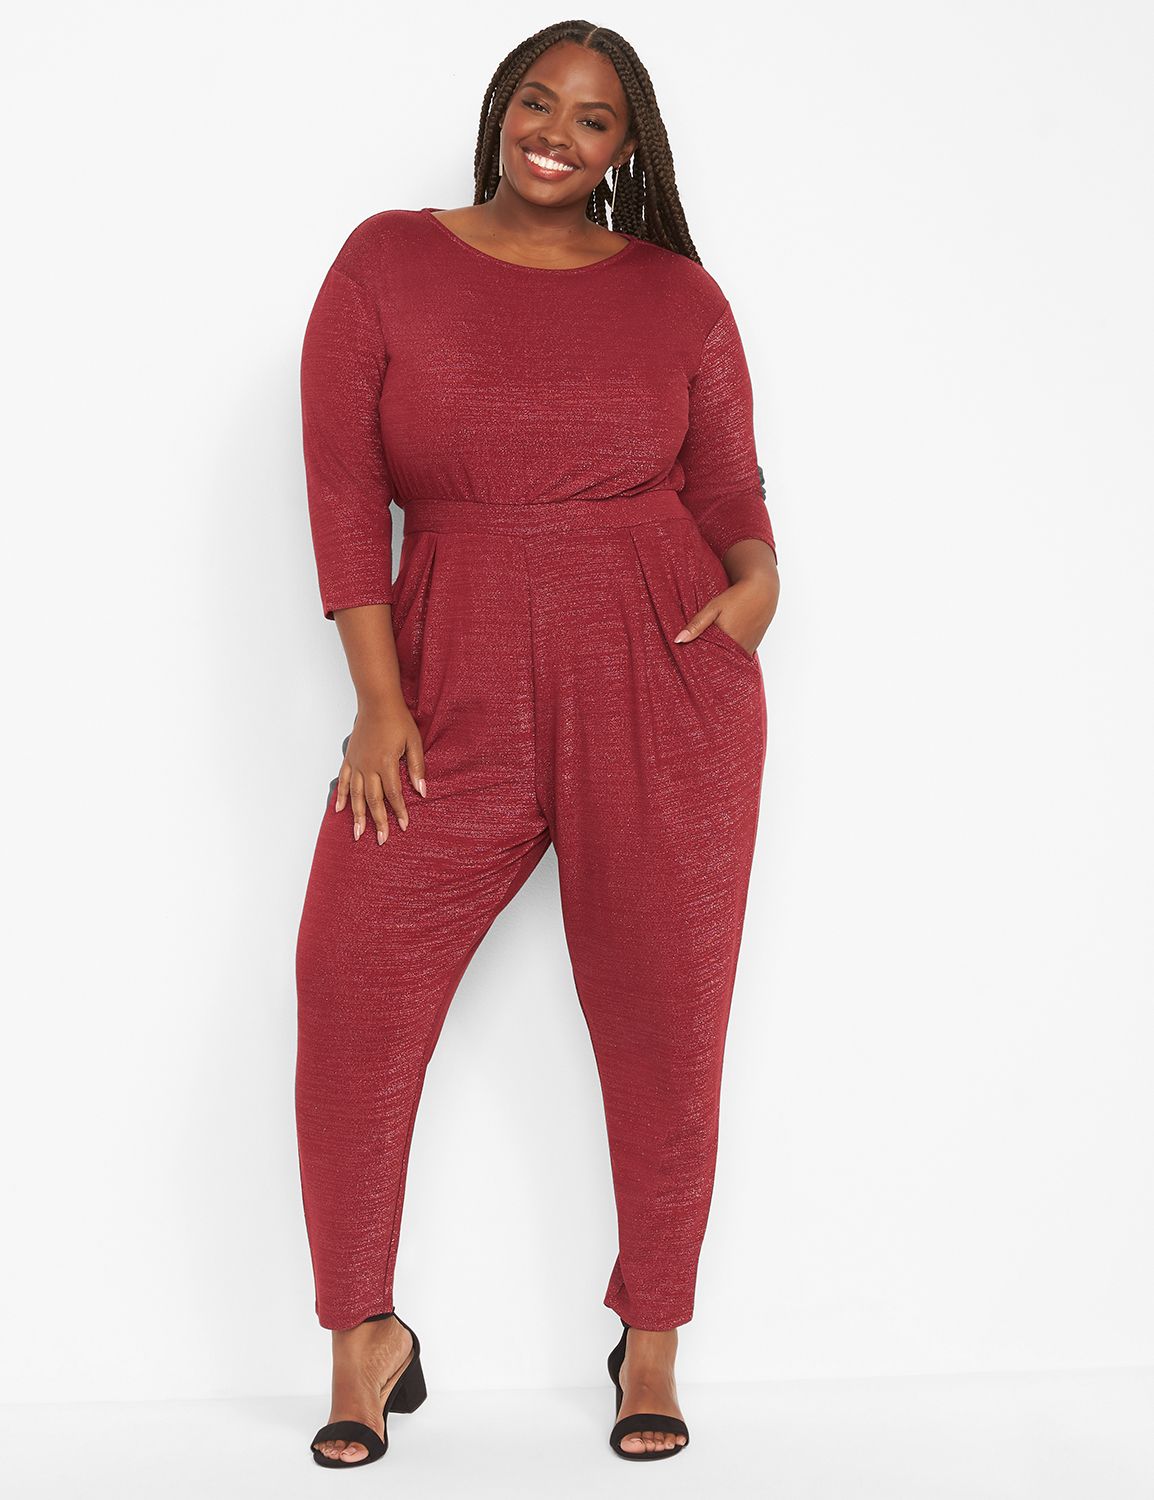 Clearance Plus Size Clothing - On Sale Today Lane Bryant